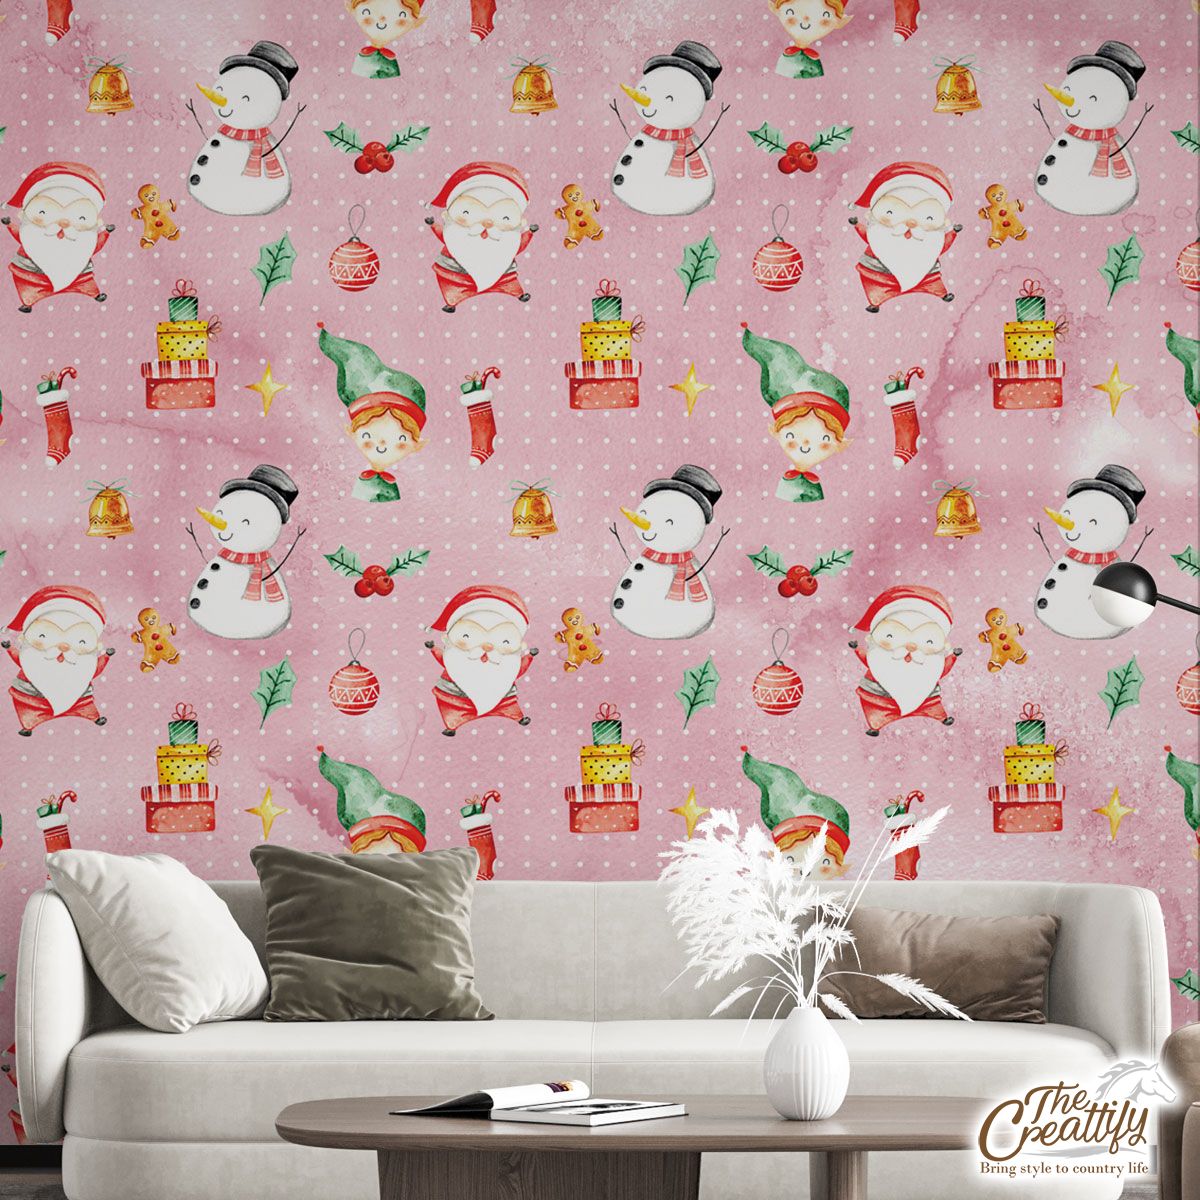 Santa Clause, Snowman And Christmas Elf With Christmas Gifts Wall Mural